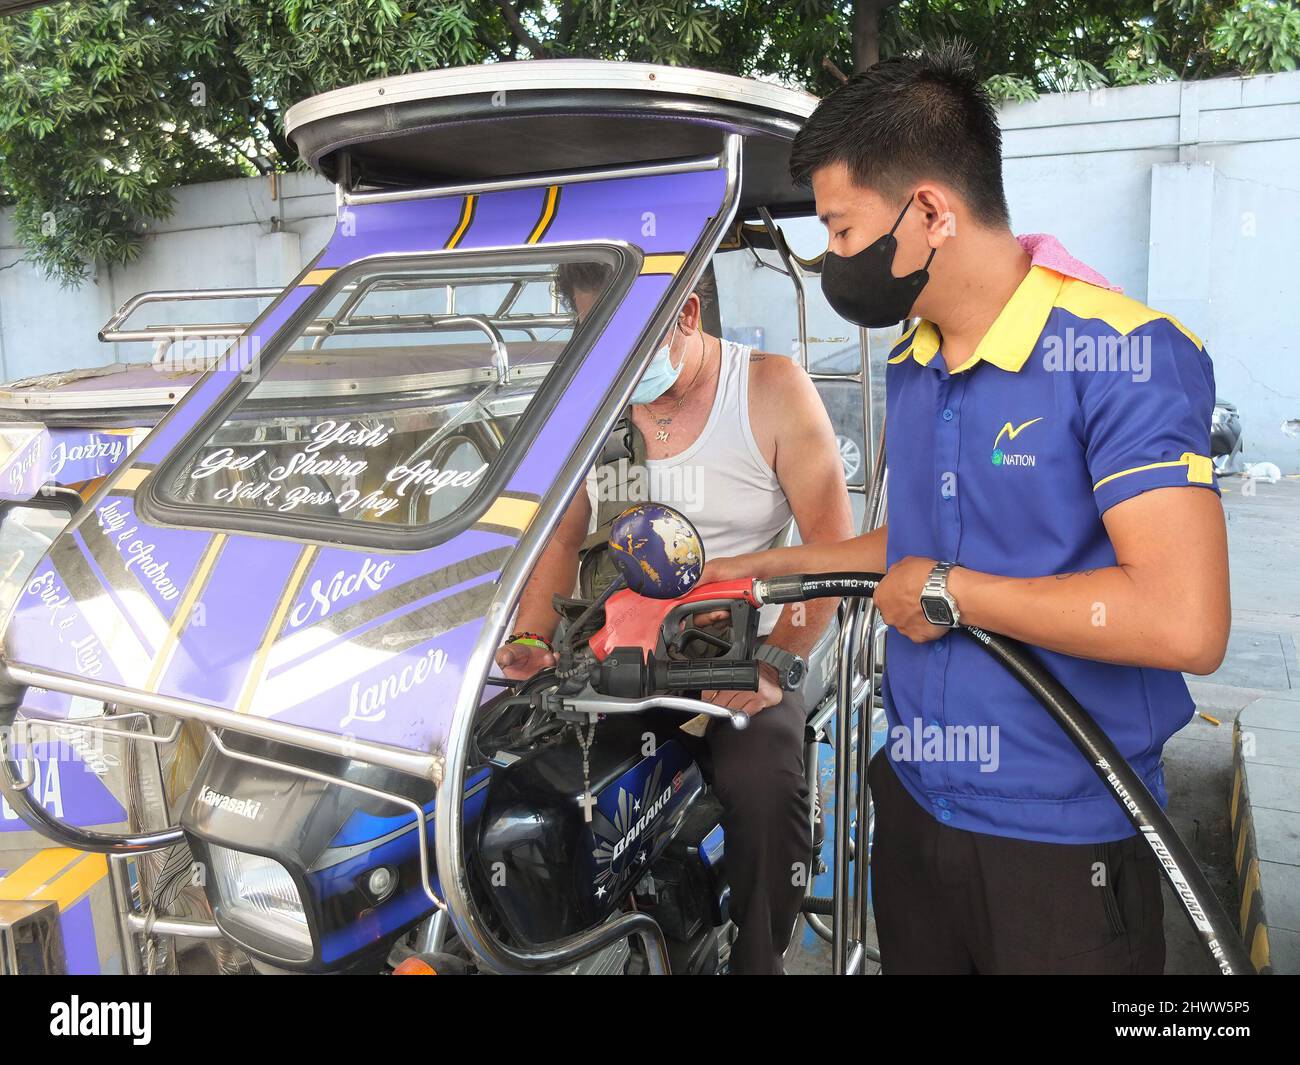 A tricycle is being refueled by a gasoline attendant. The Philippines is experiencing soaring prices in oil and other fuel products amid the Russia-Ukraine conflict. The Department of energy warns the public to brace for much more higher cost of fuel in the days ahead. they said this price fallout is not only happening to the Philippines but also in other parts of the world. The Philippine Government is preparing contingency plan to subsidize the fuel costs for public transportation sector, farmers and fisher folk. (Photo by Josefiel Rivera/SOPA Images/Sipa USA) Stock Photo